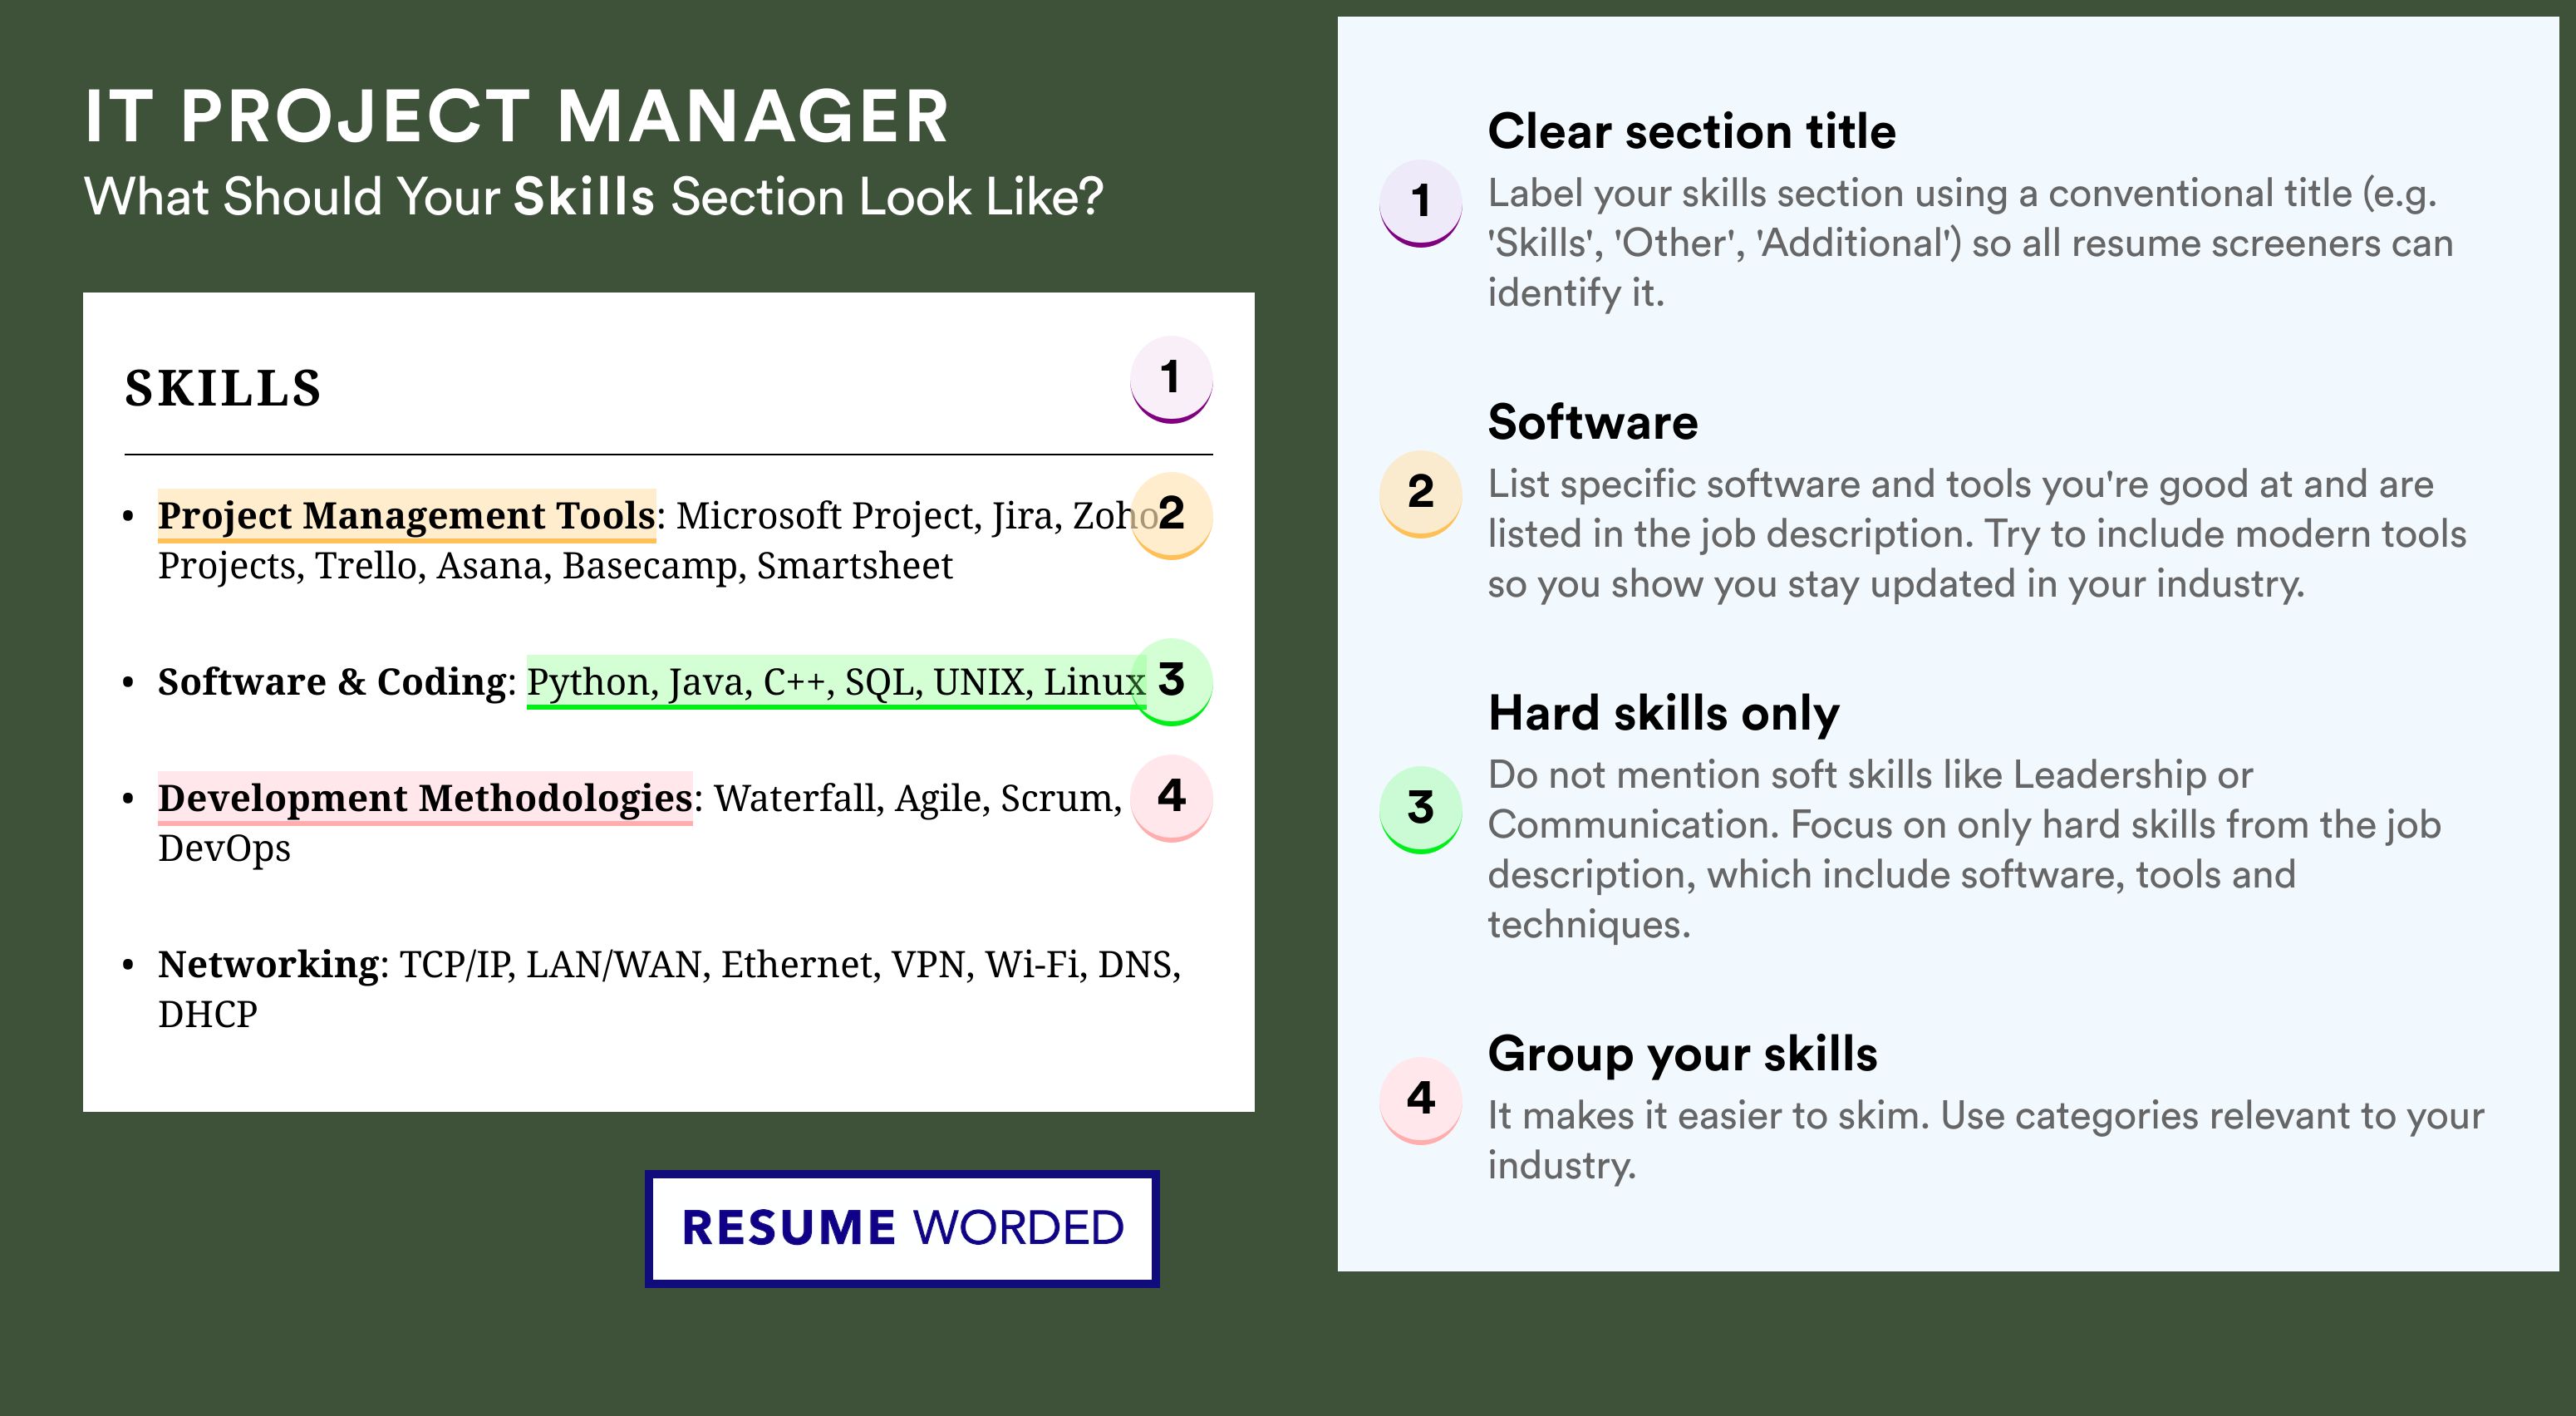 How To Write Your Skills Section - IT Project Manager Roles